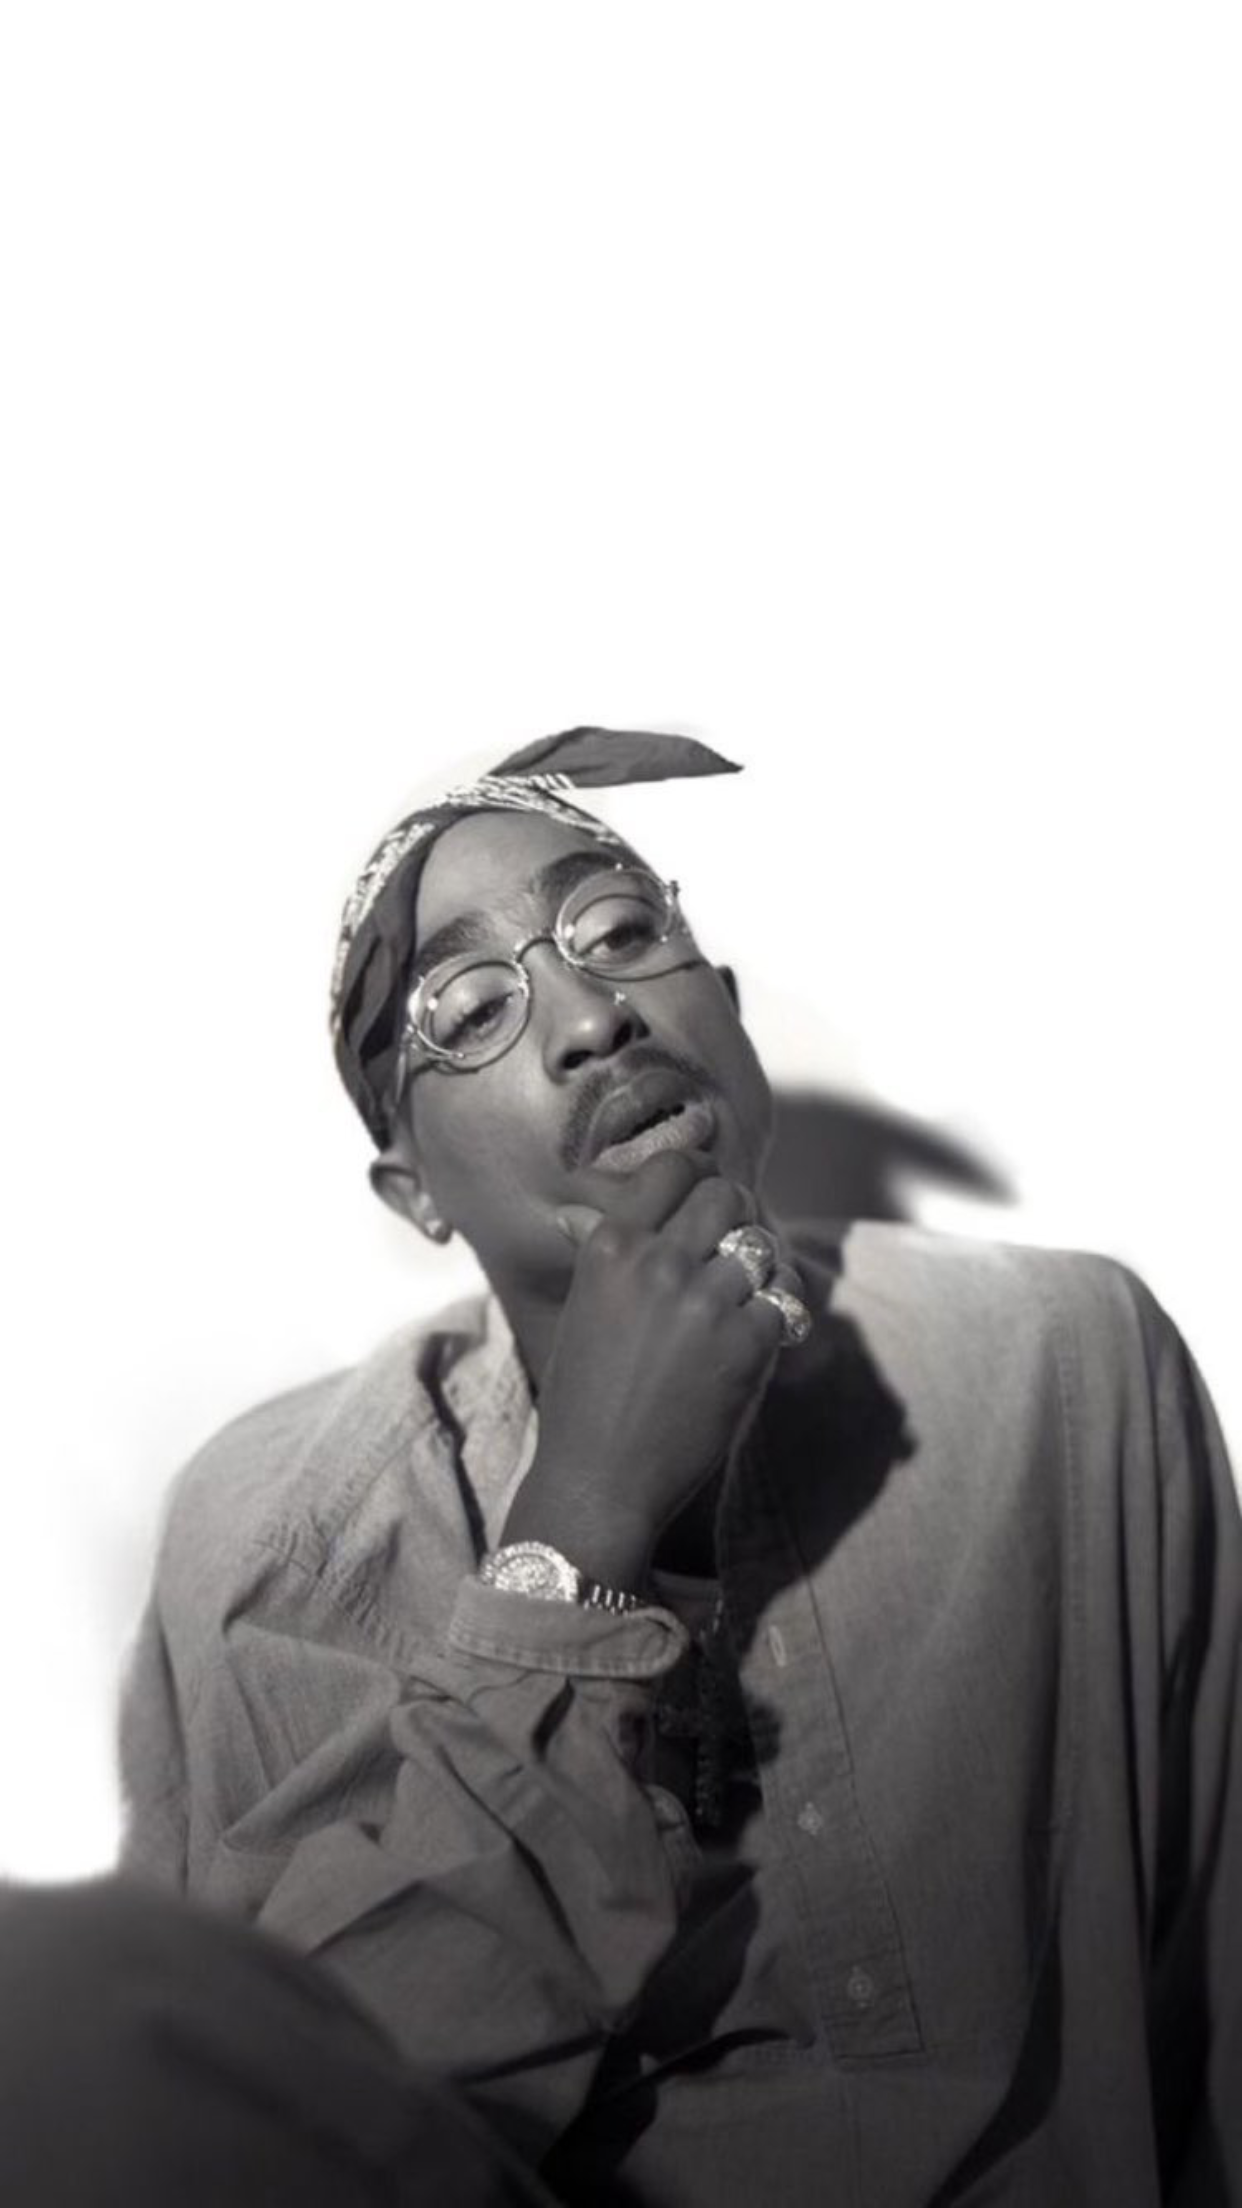 tupac wallpaper iphone,photograph,forehead,black and white,photography,glasses